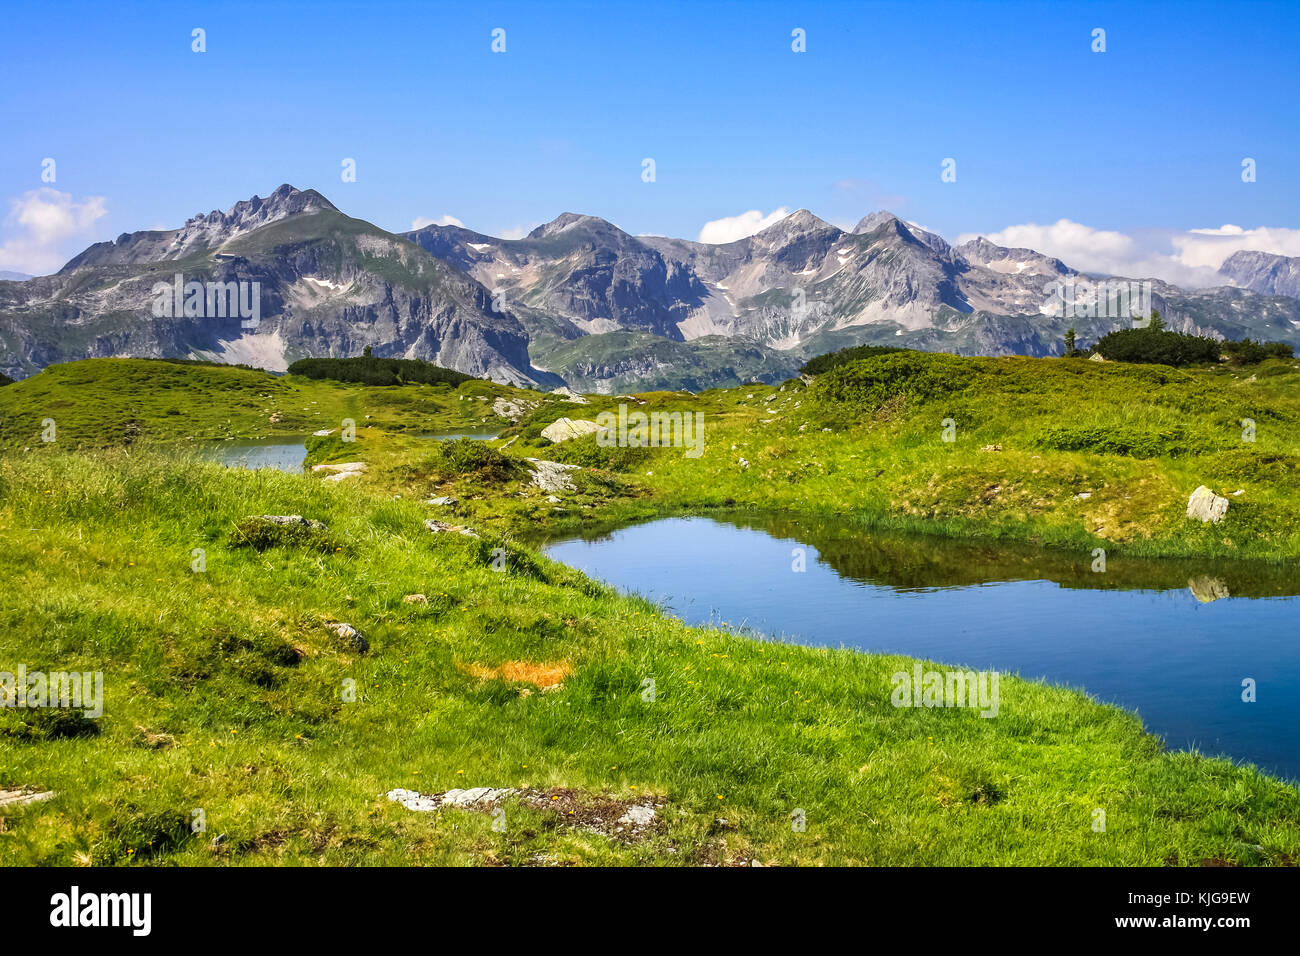 Austria, Styria, Murau district, Alps and lake in the foreground Stock Photo